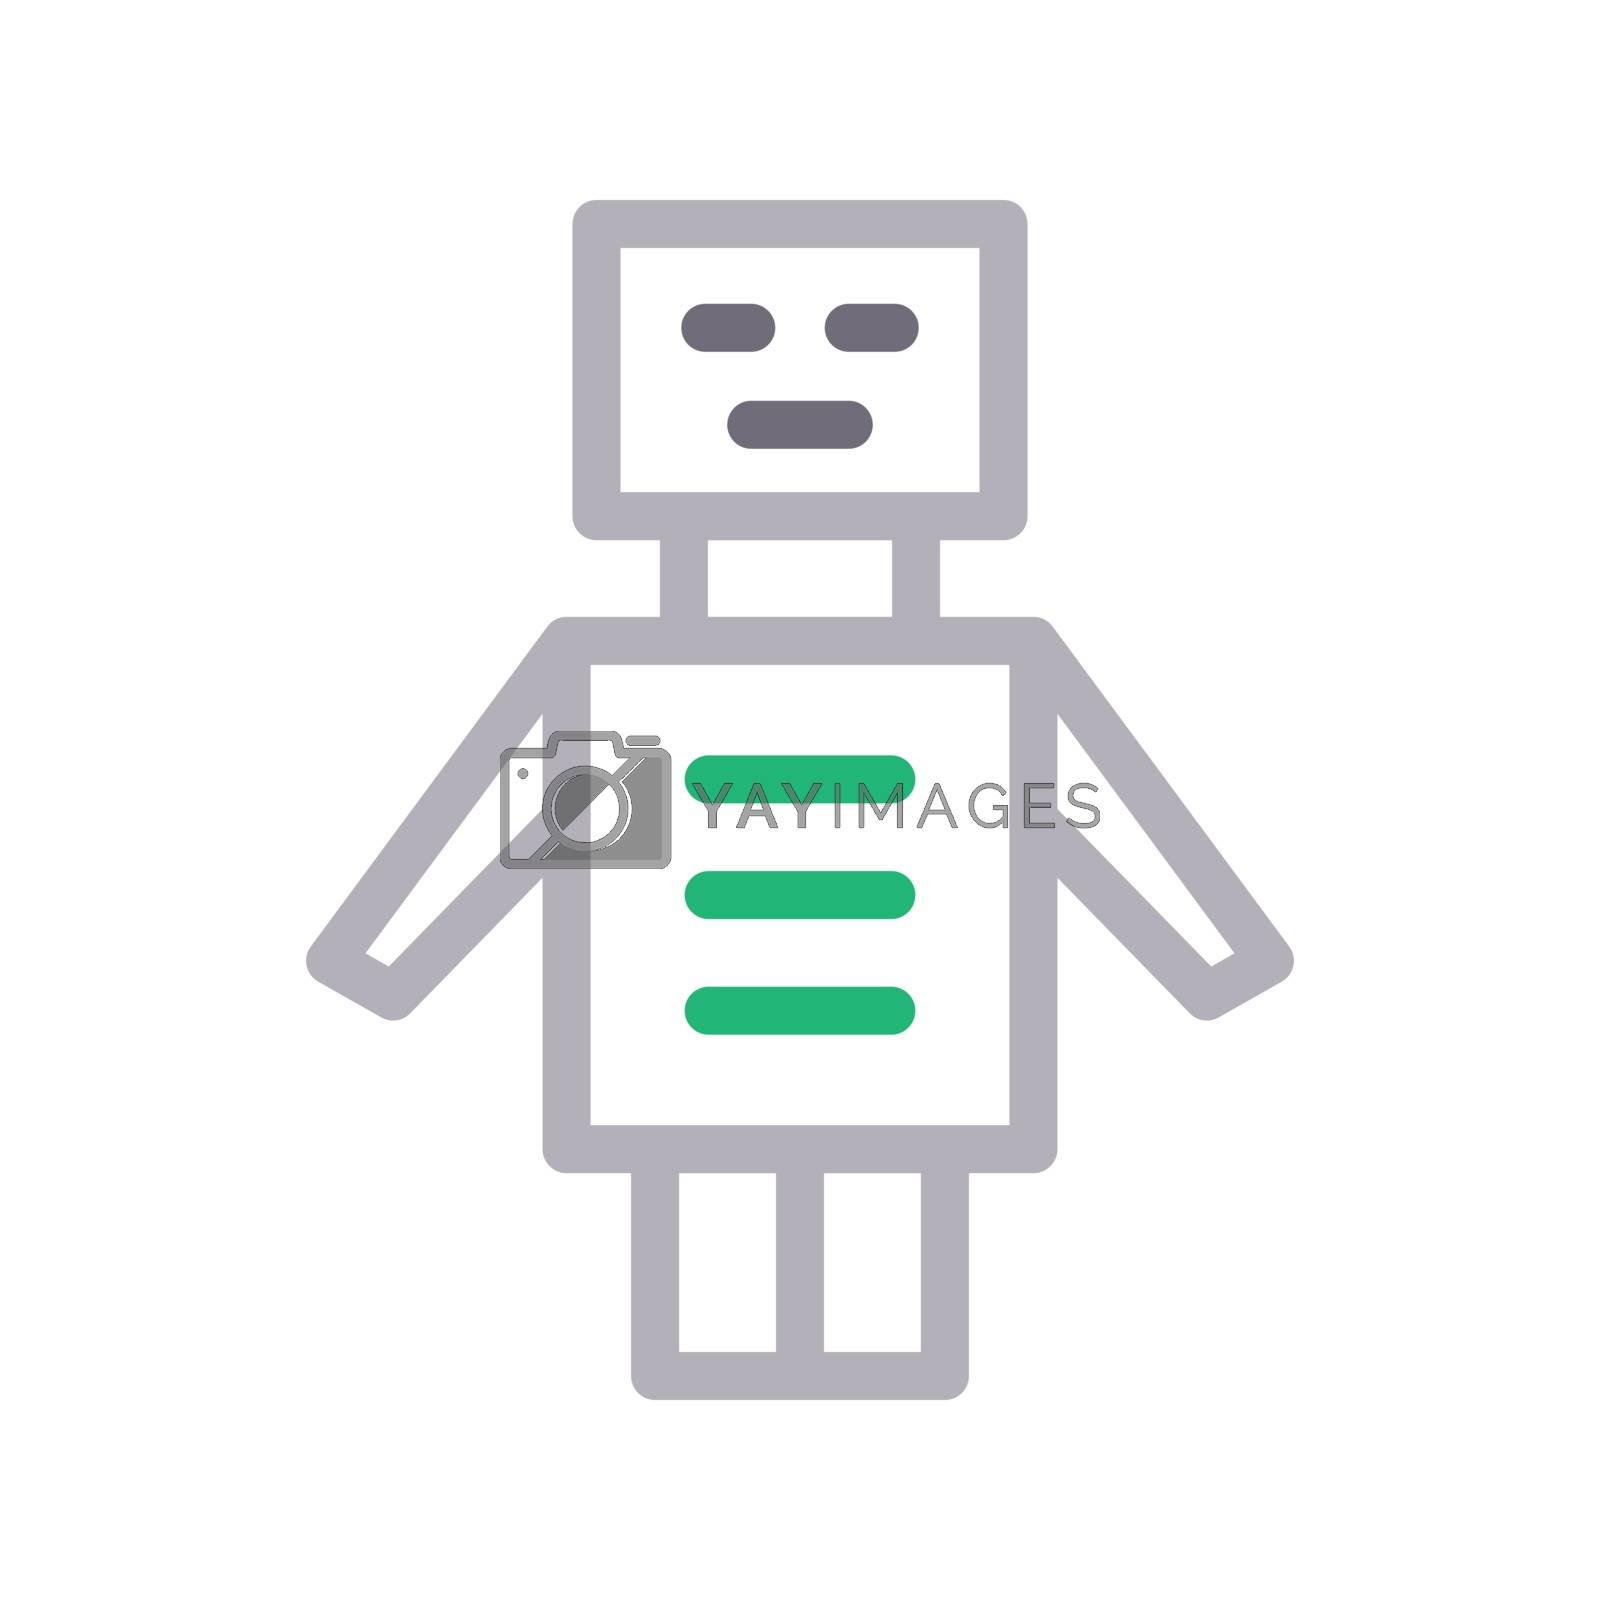 Royalty free image of auto by vectorstall